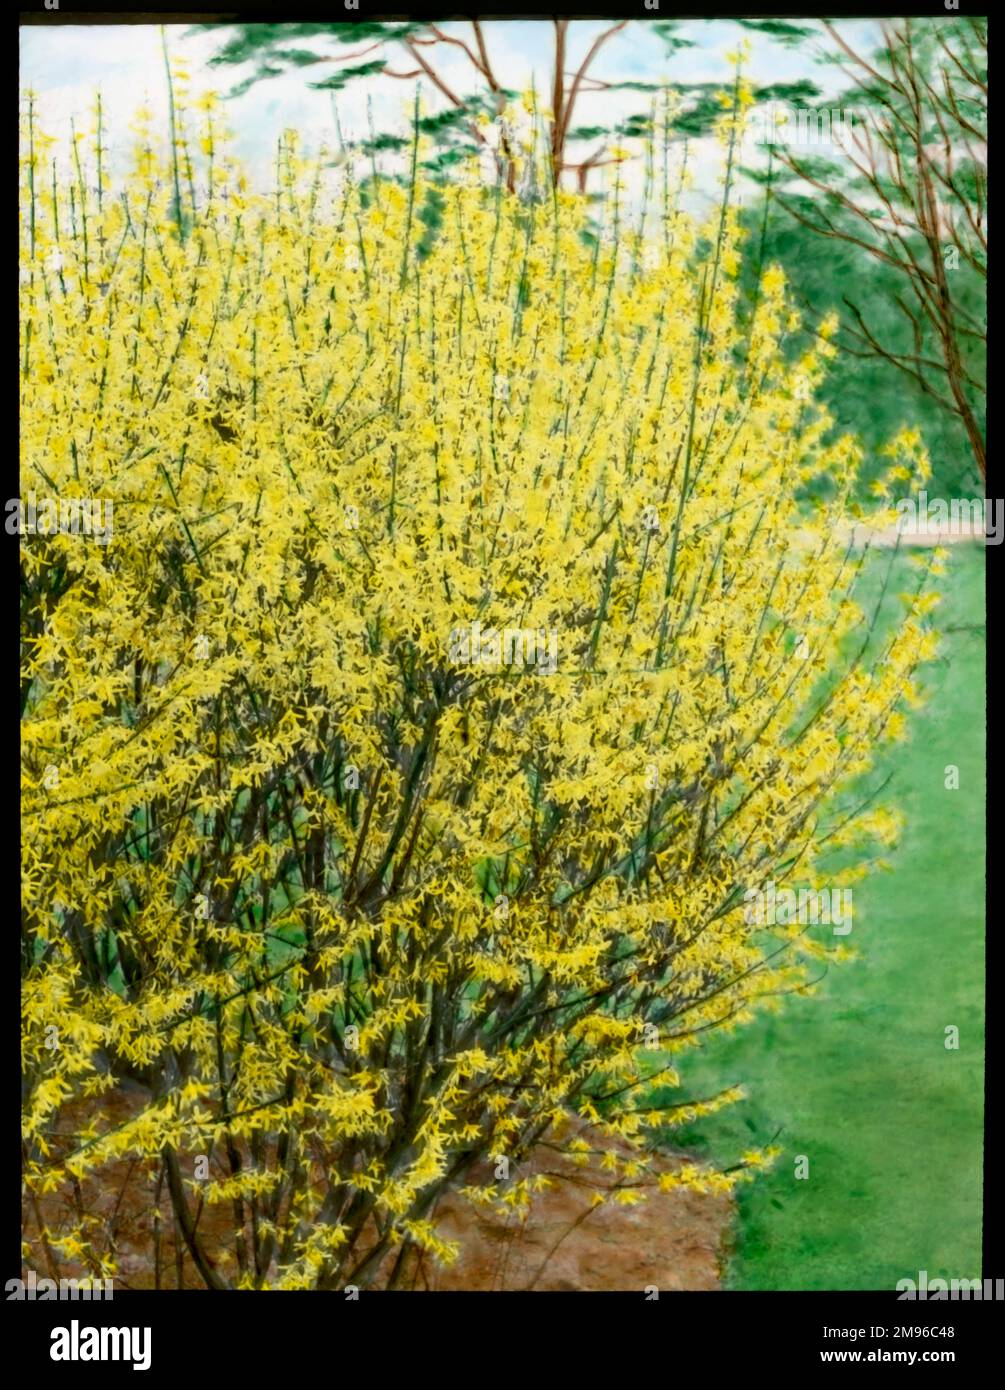 Forsythia Intermedia, a genus of the Oleaceae (Olive) family, and a hybrid of Forsythia Suspensa and Forsythia Viridissima.  It has bright yellow flowers. Stock Photo